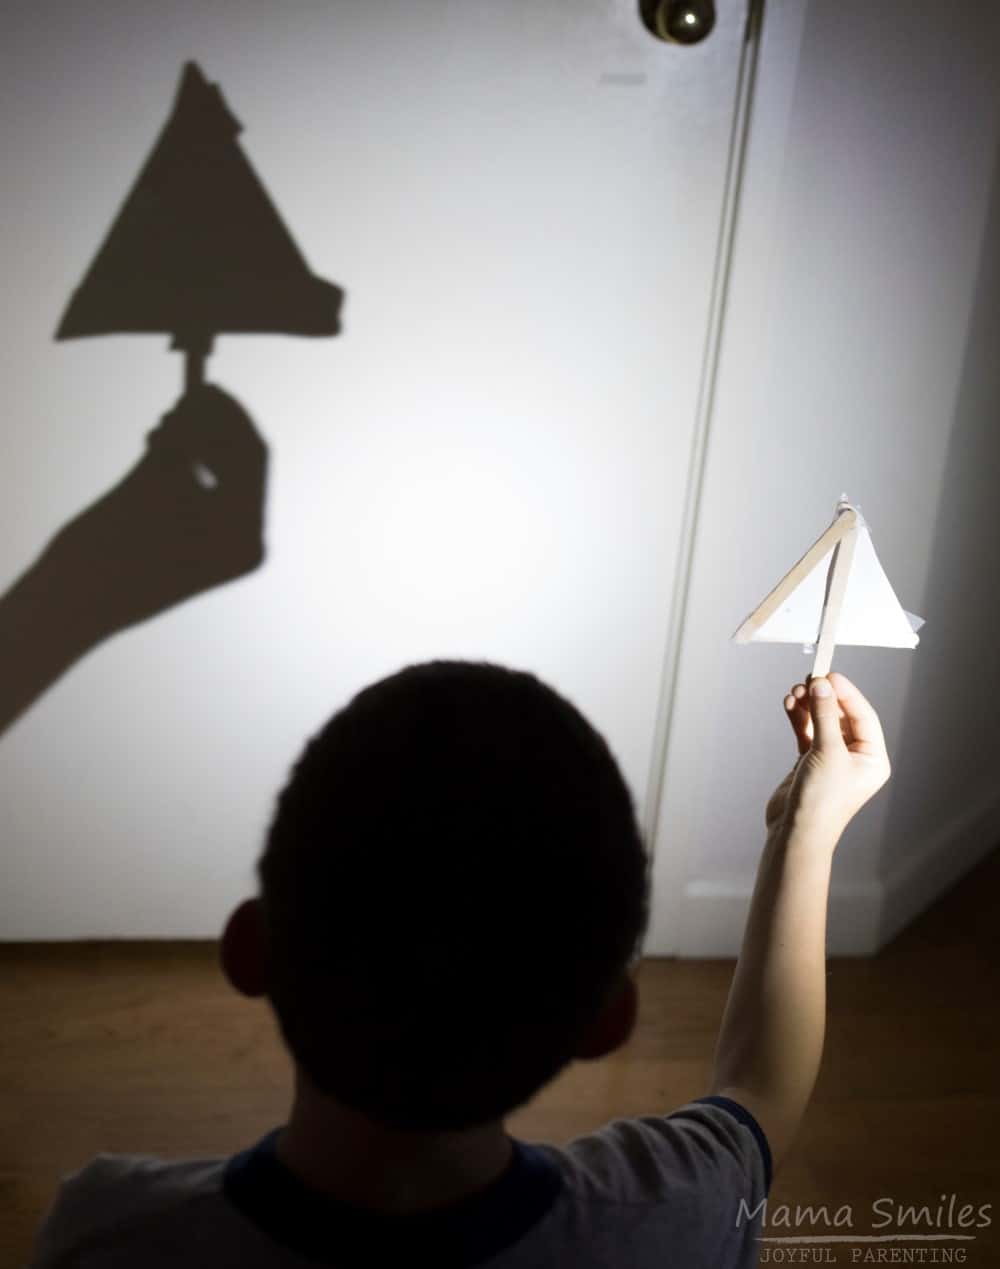 Make the most of shorter days by making family memories with these light and shadow games!